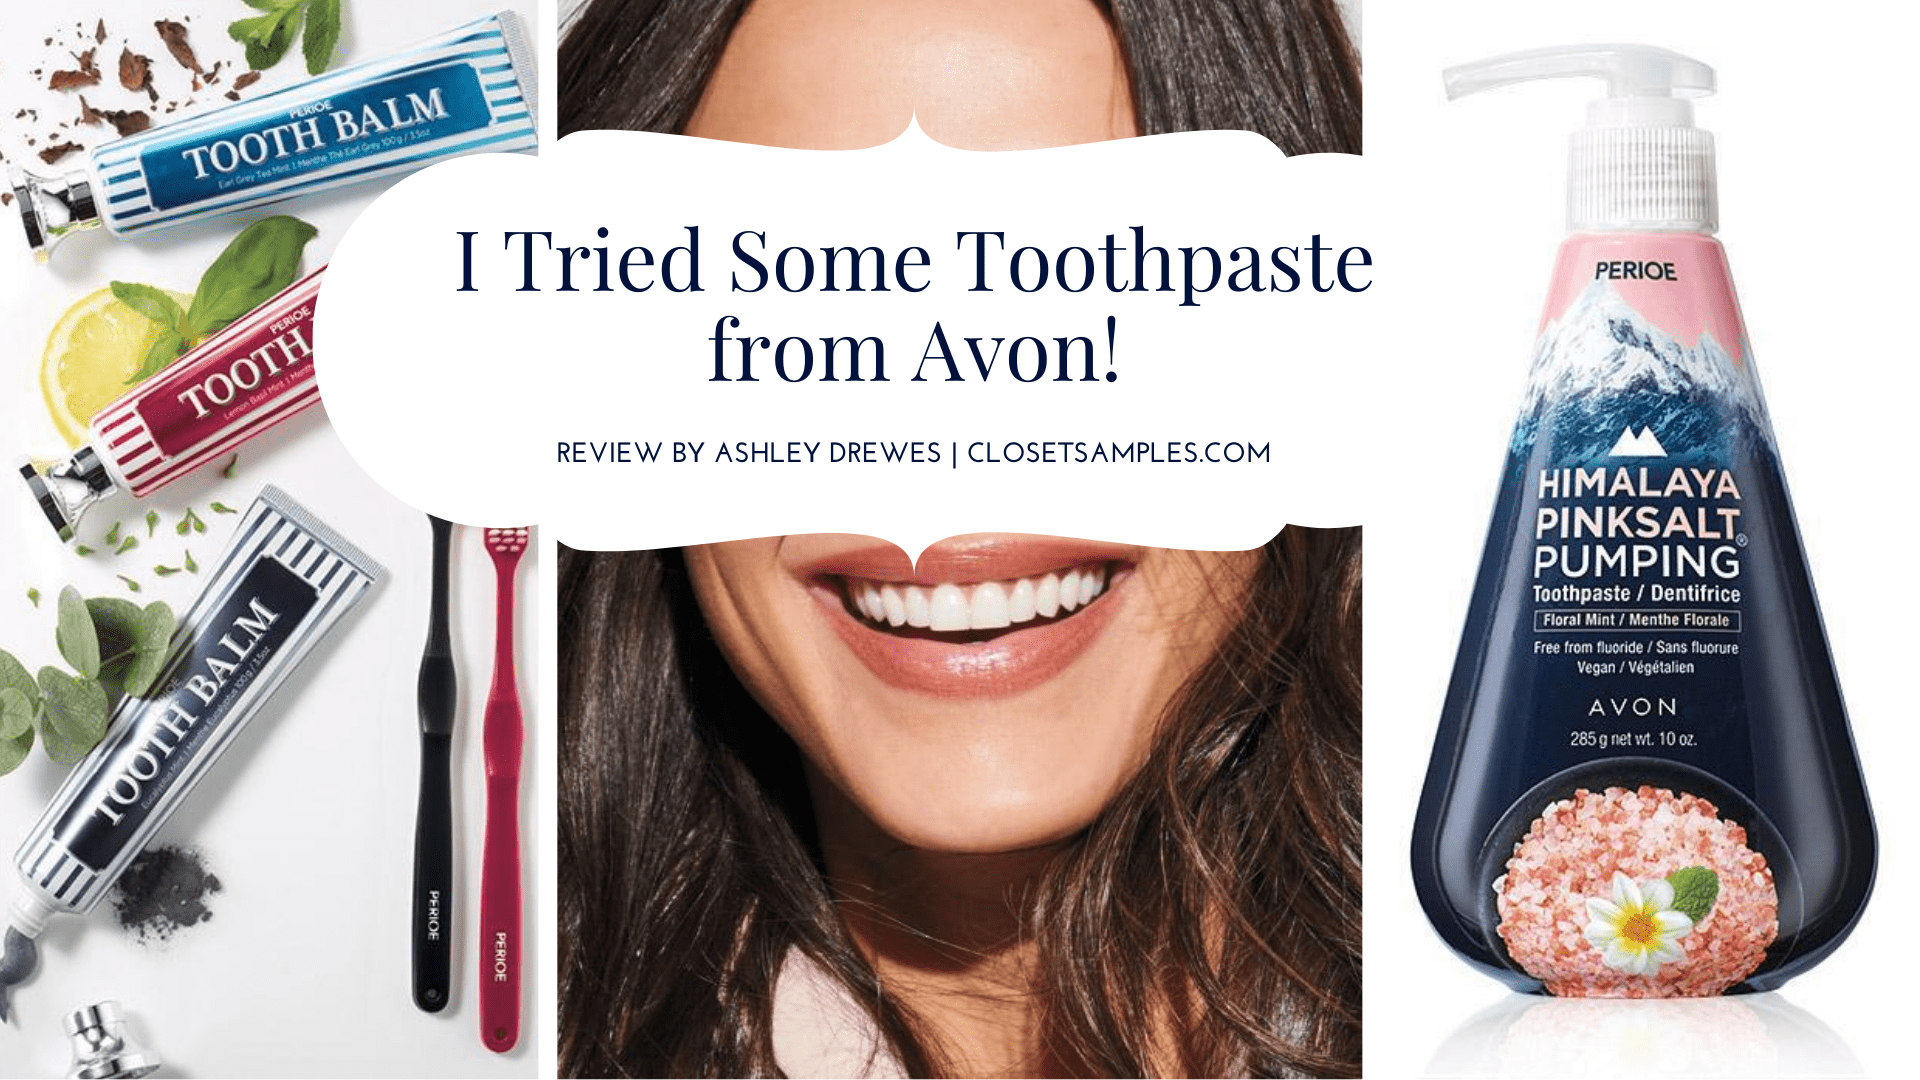 Avon-Toothpaste-Review-Closetsamples-2020.png